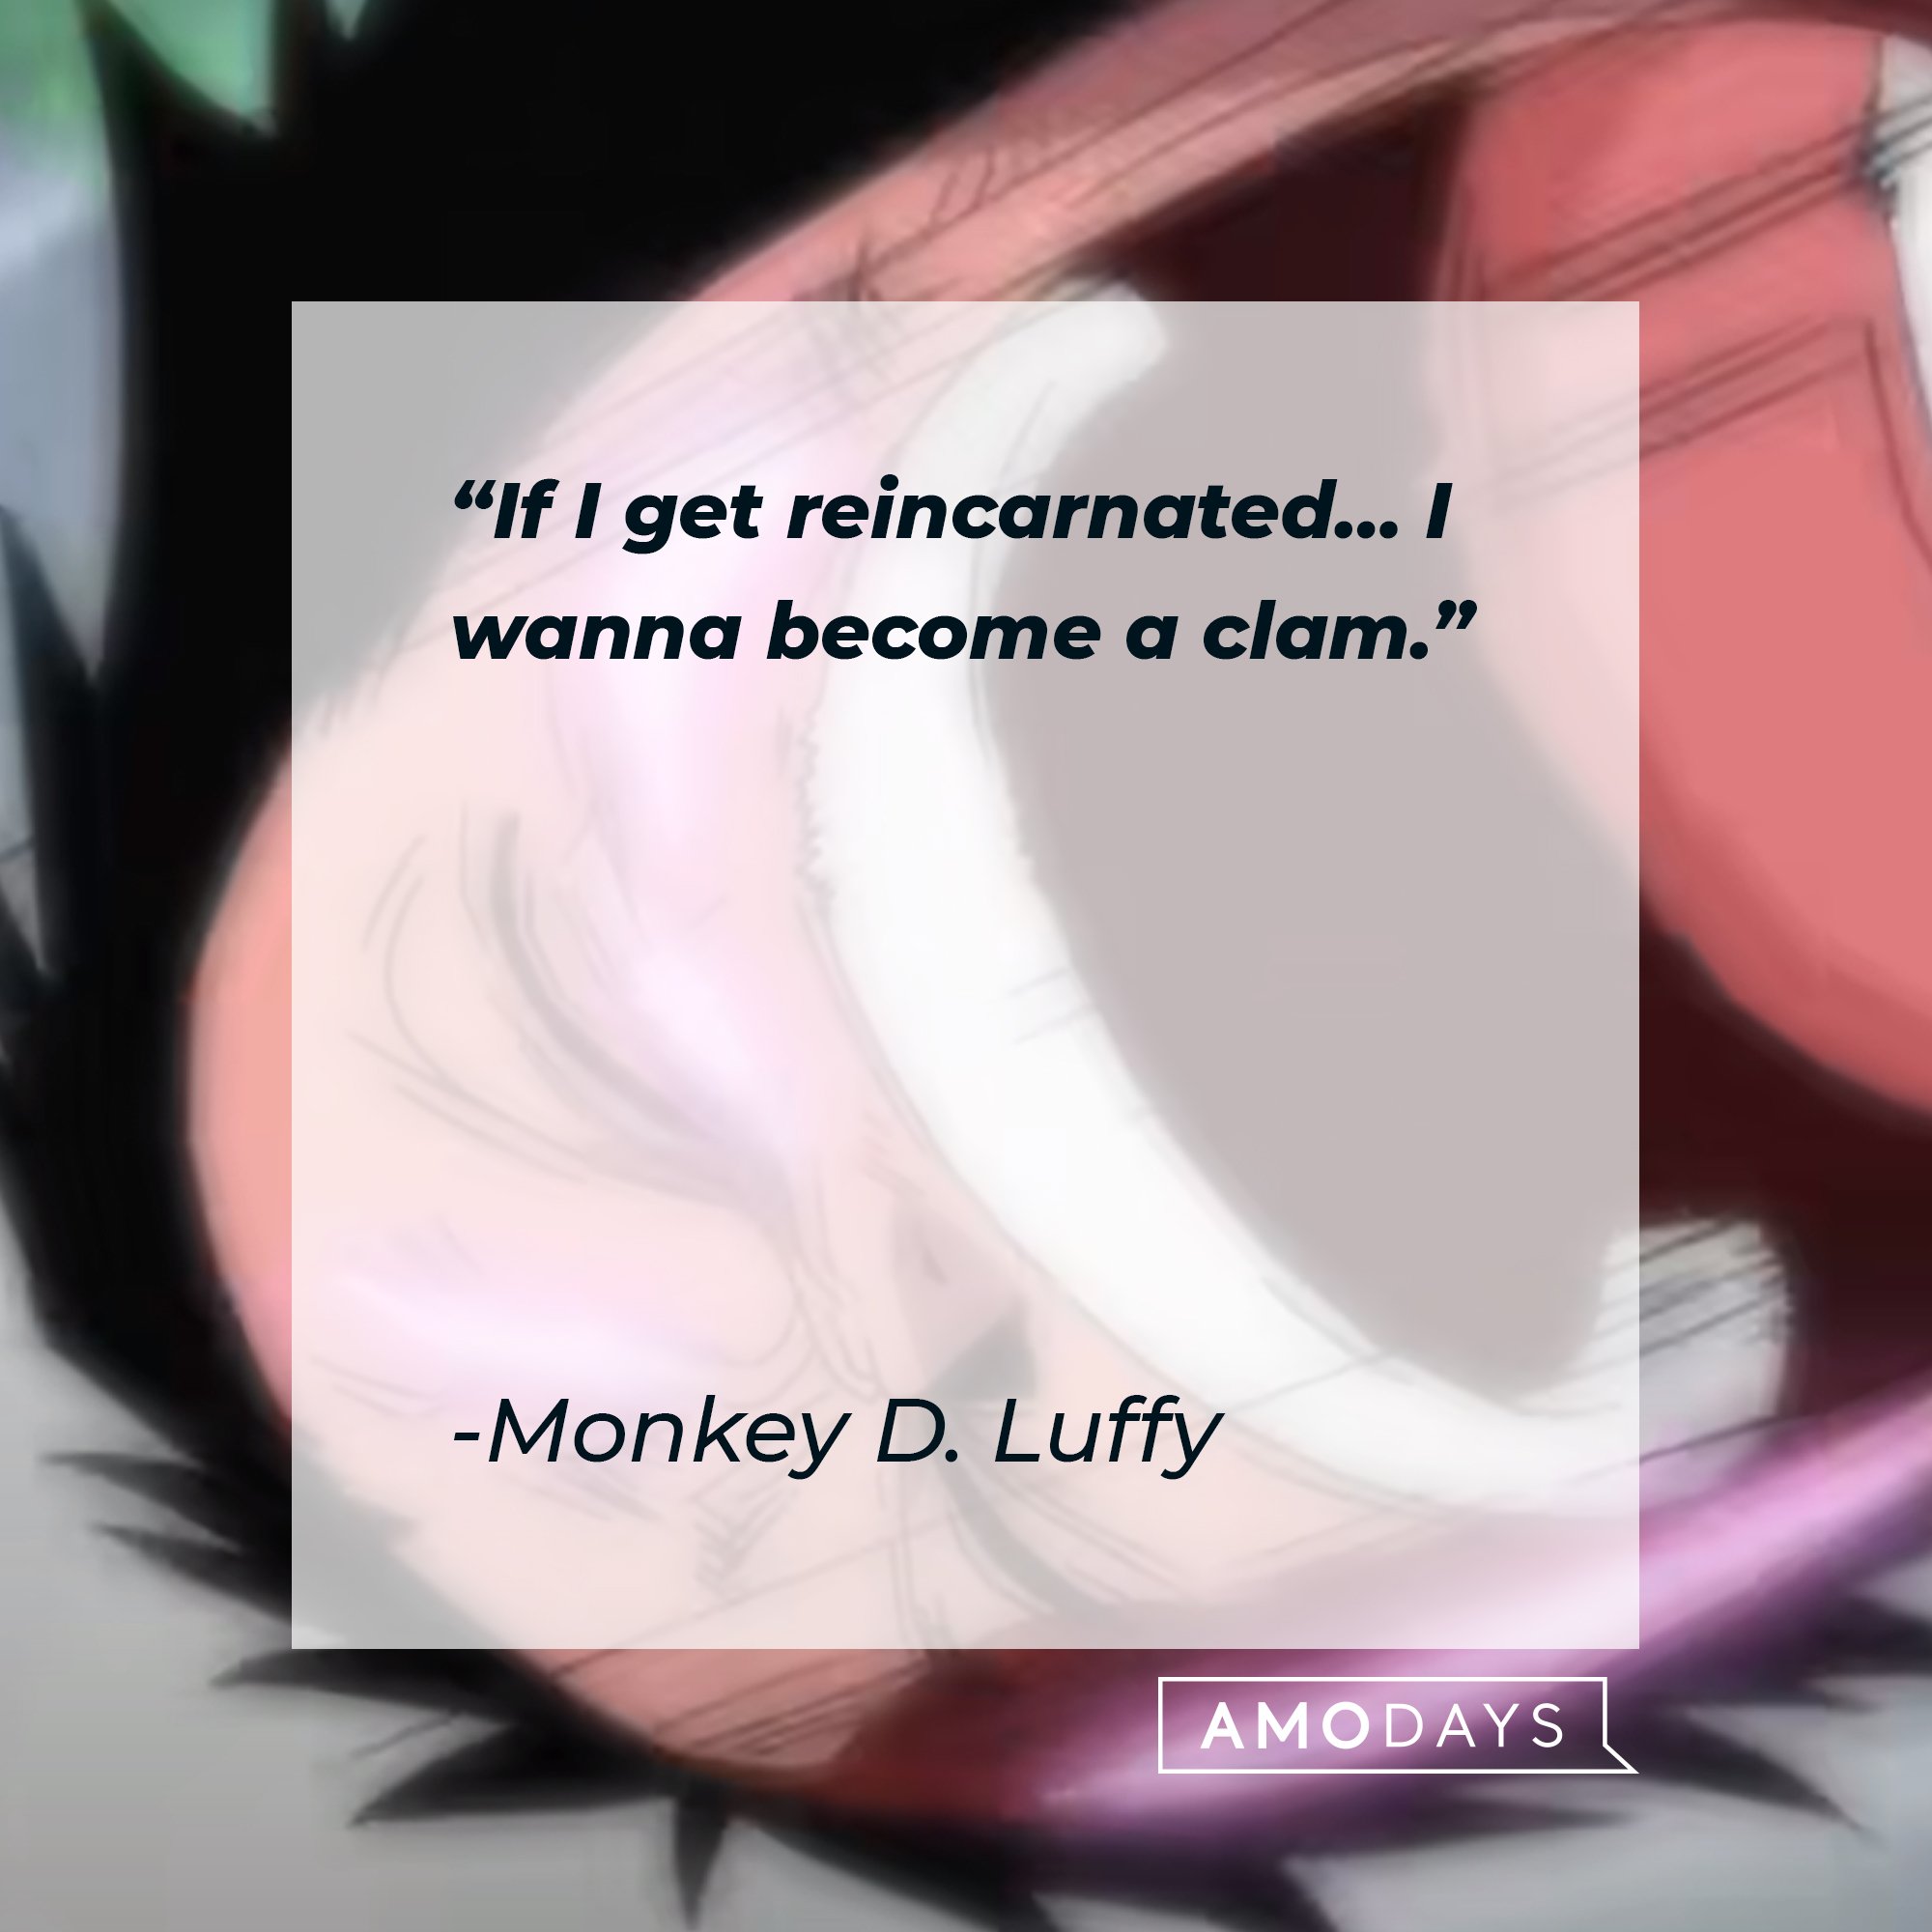 Monkey D. Luffy's quote:  "If I get reincarnated… I wanna become a clam."  |  Image: AmoDays